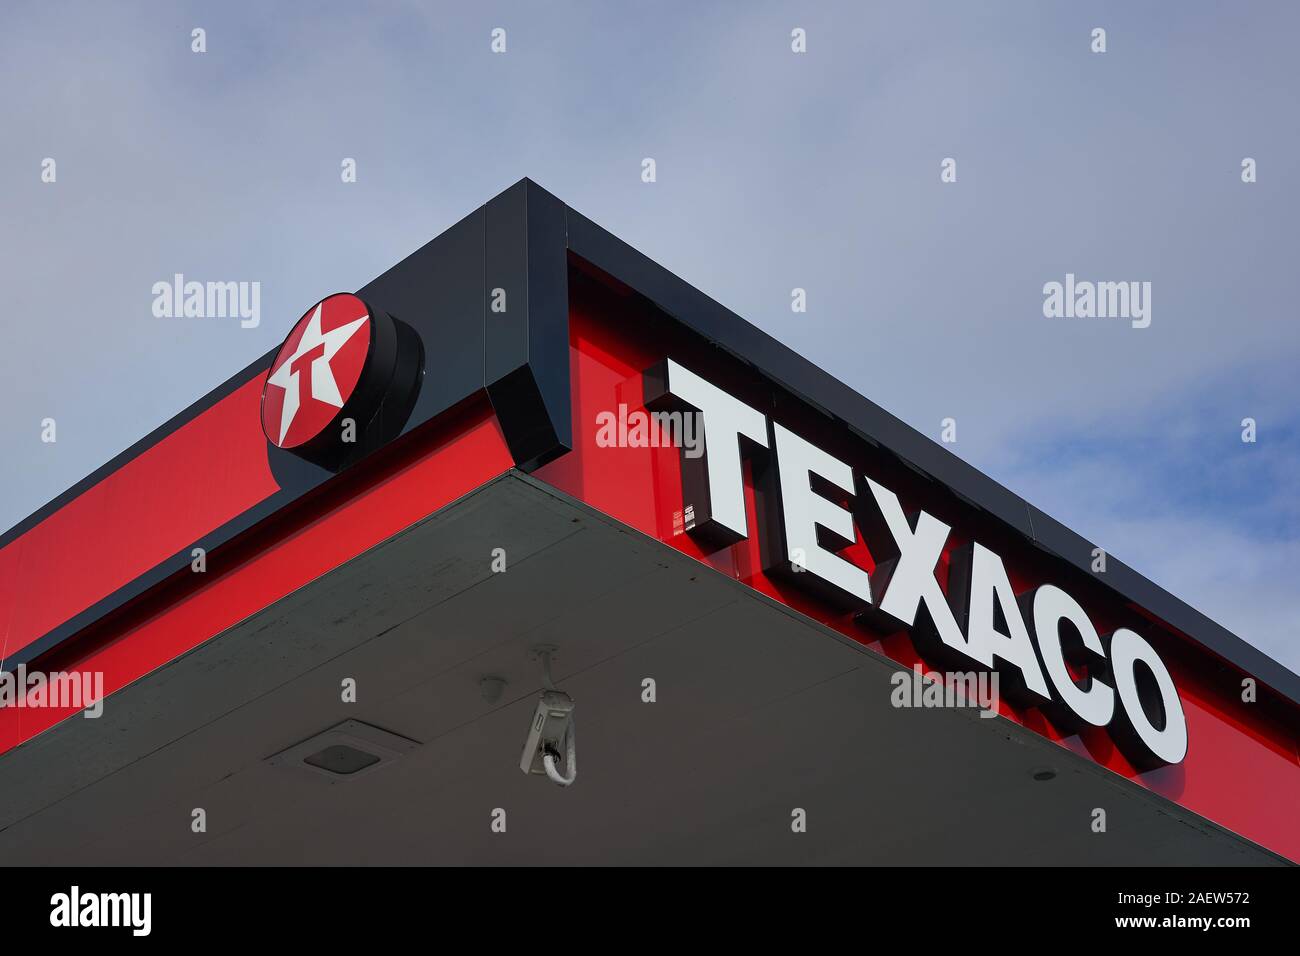 The Texaco Logo Is Seen At A Texaco Gas Station In Downtown Hilo On The 430